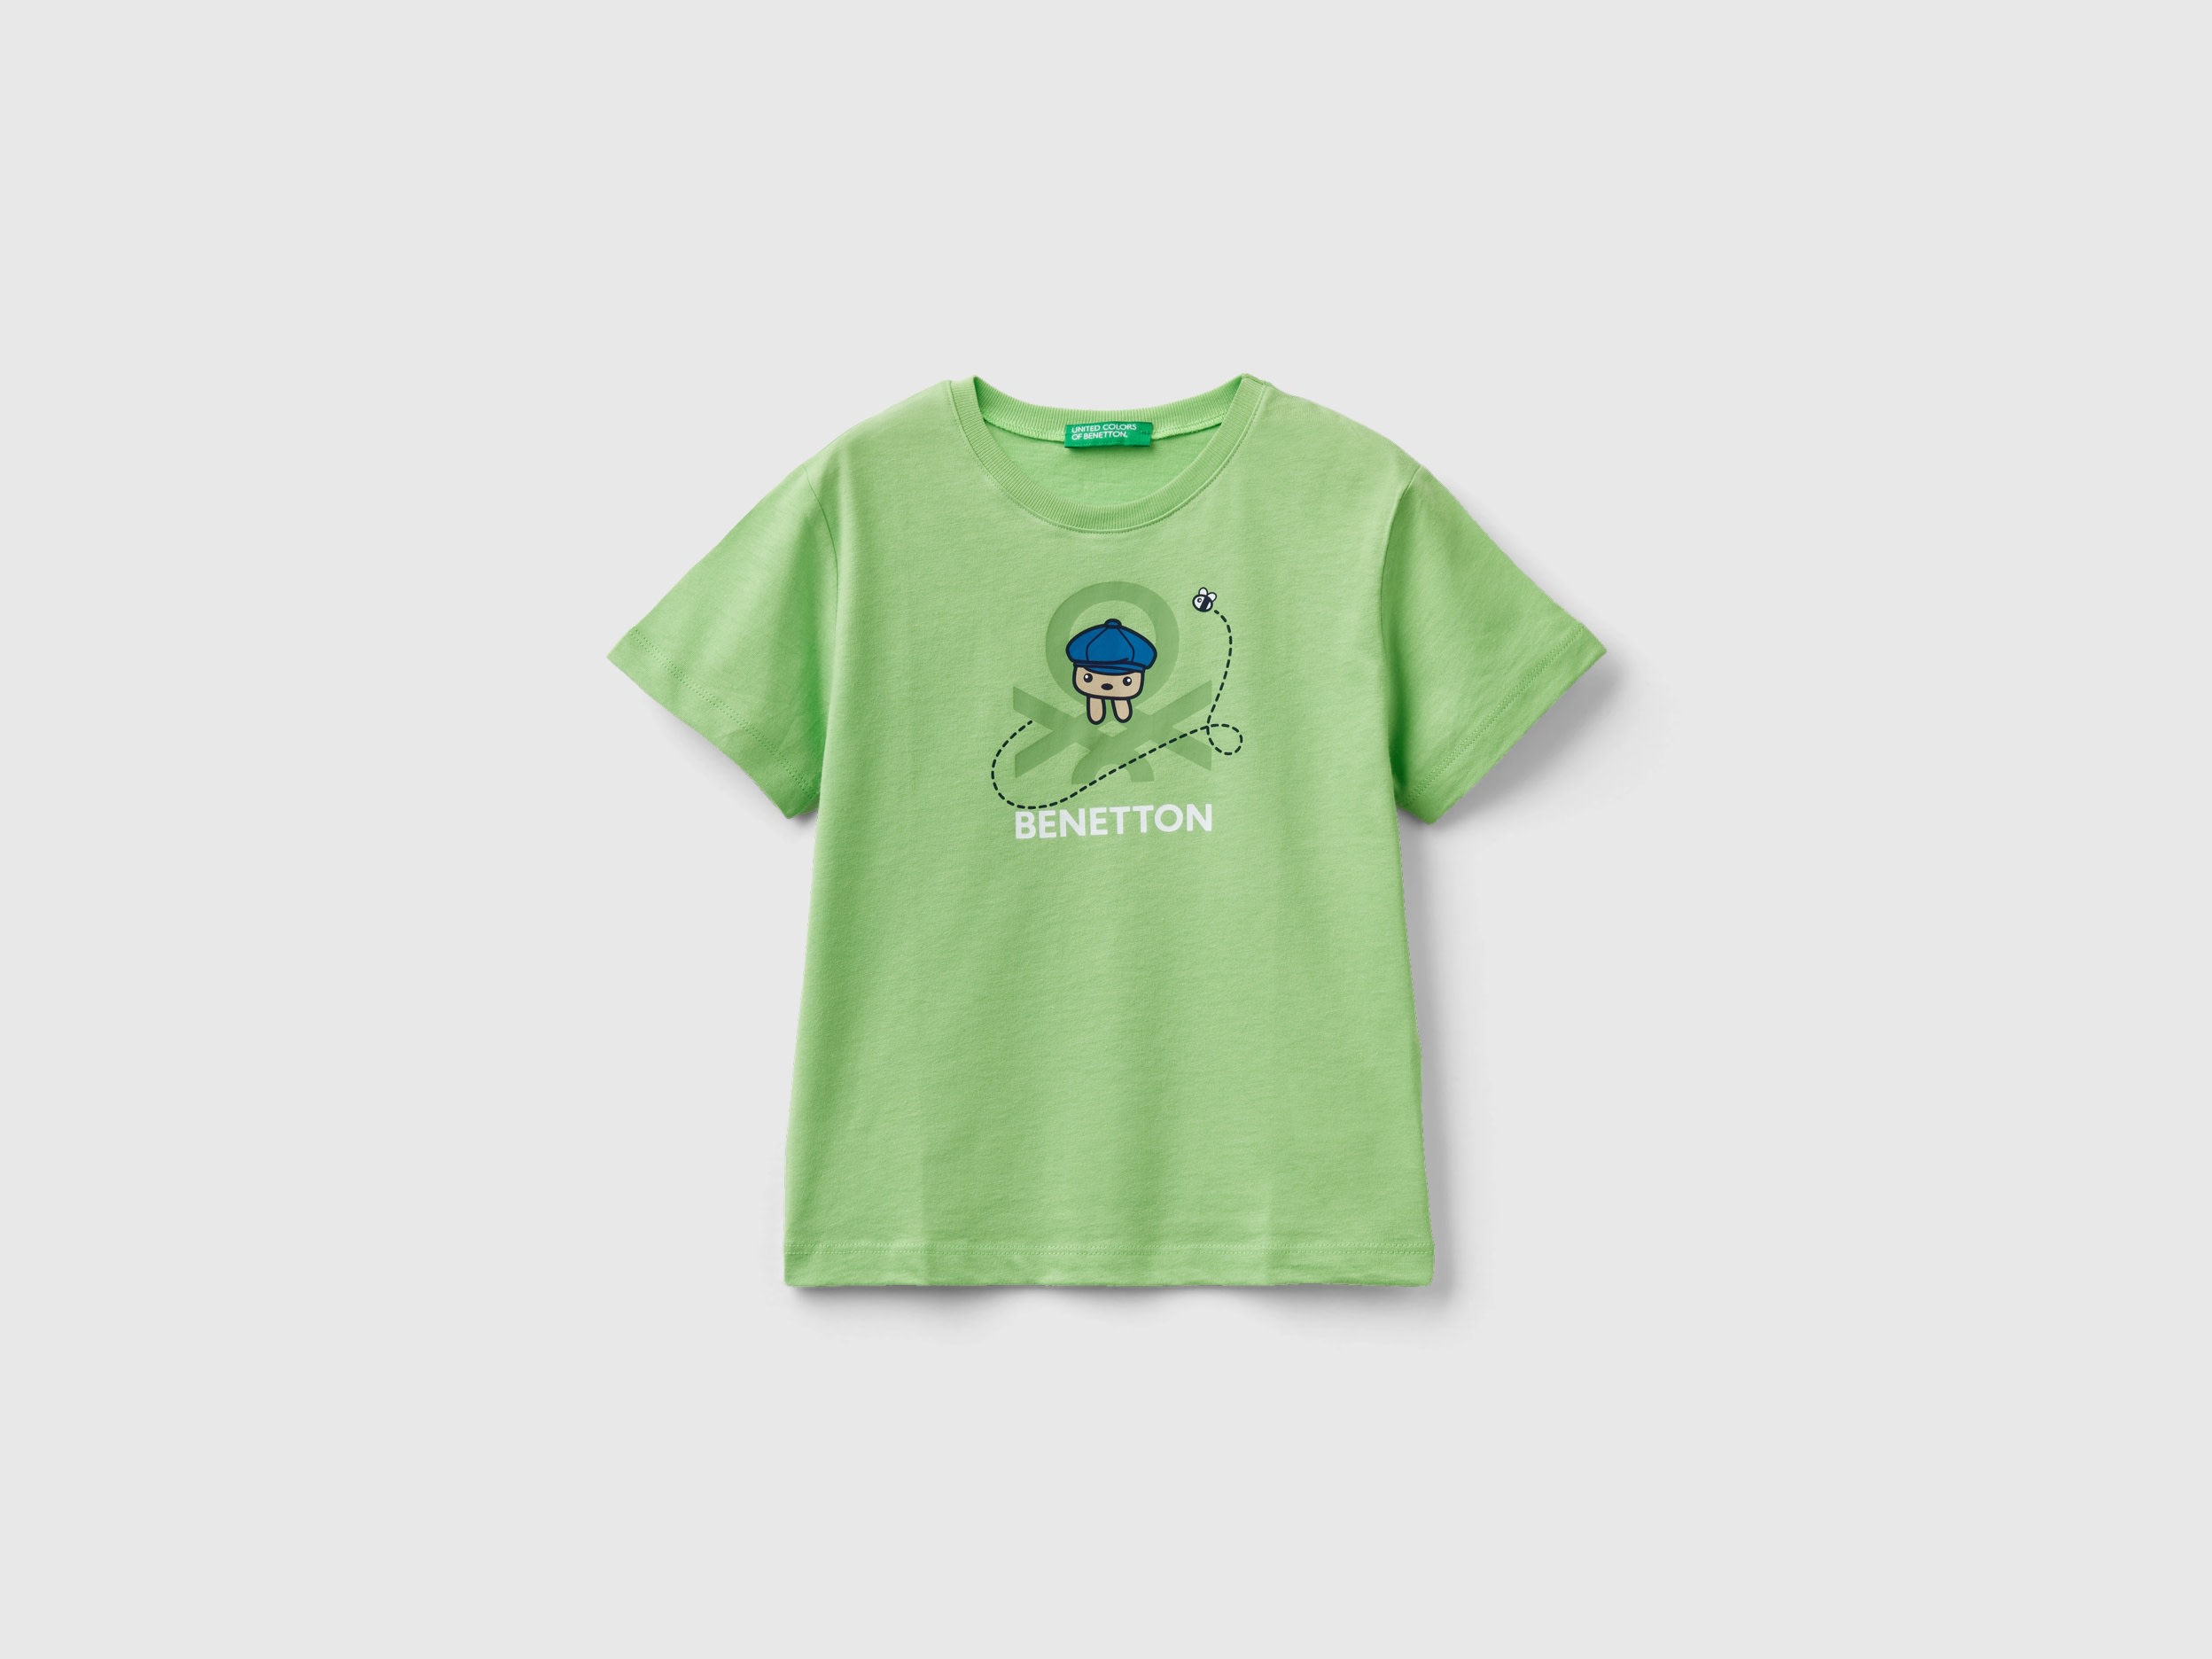 Benetton, T-shirt With Print In 100% Organic Cotton, size 5-6, Light Green, Kids